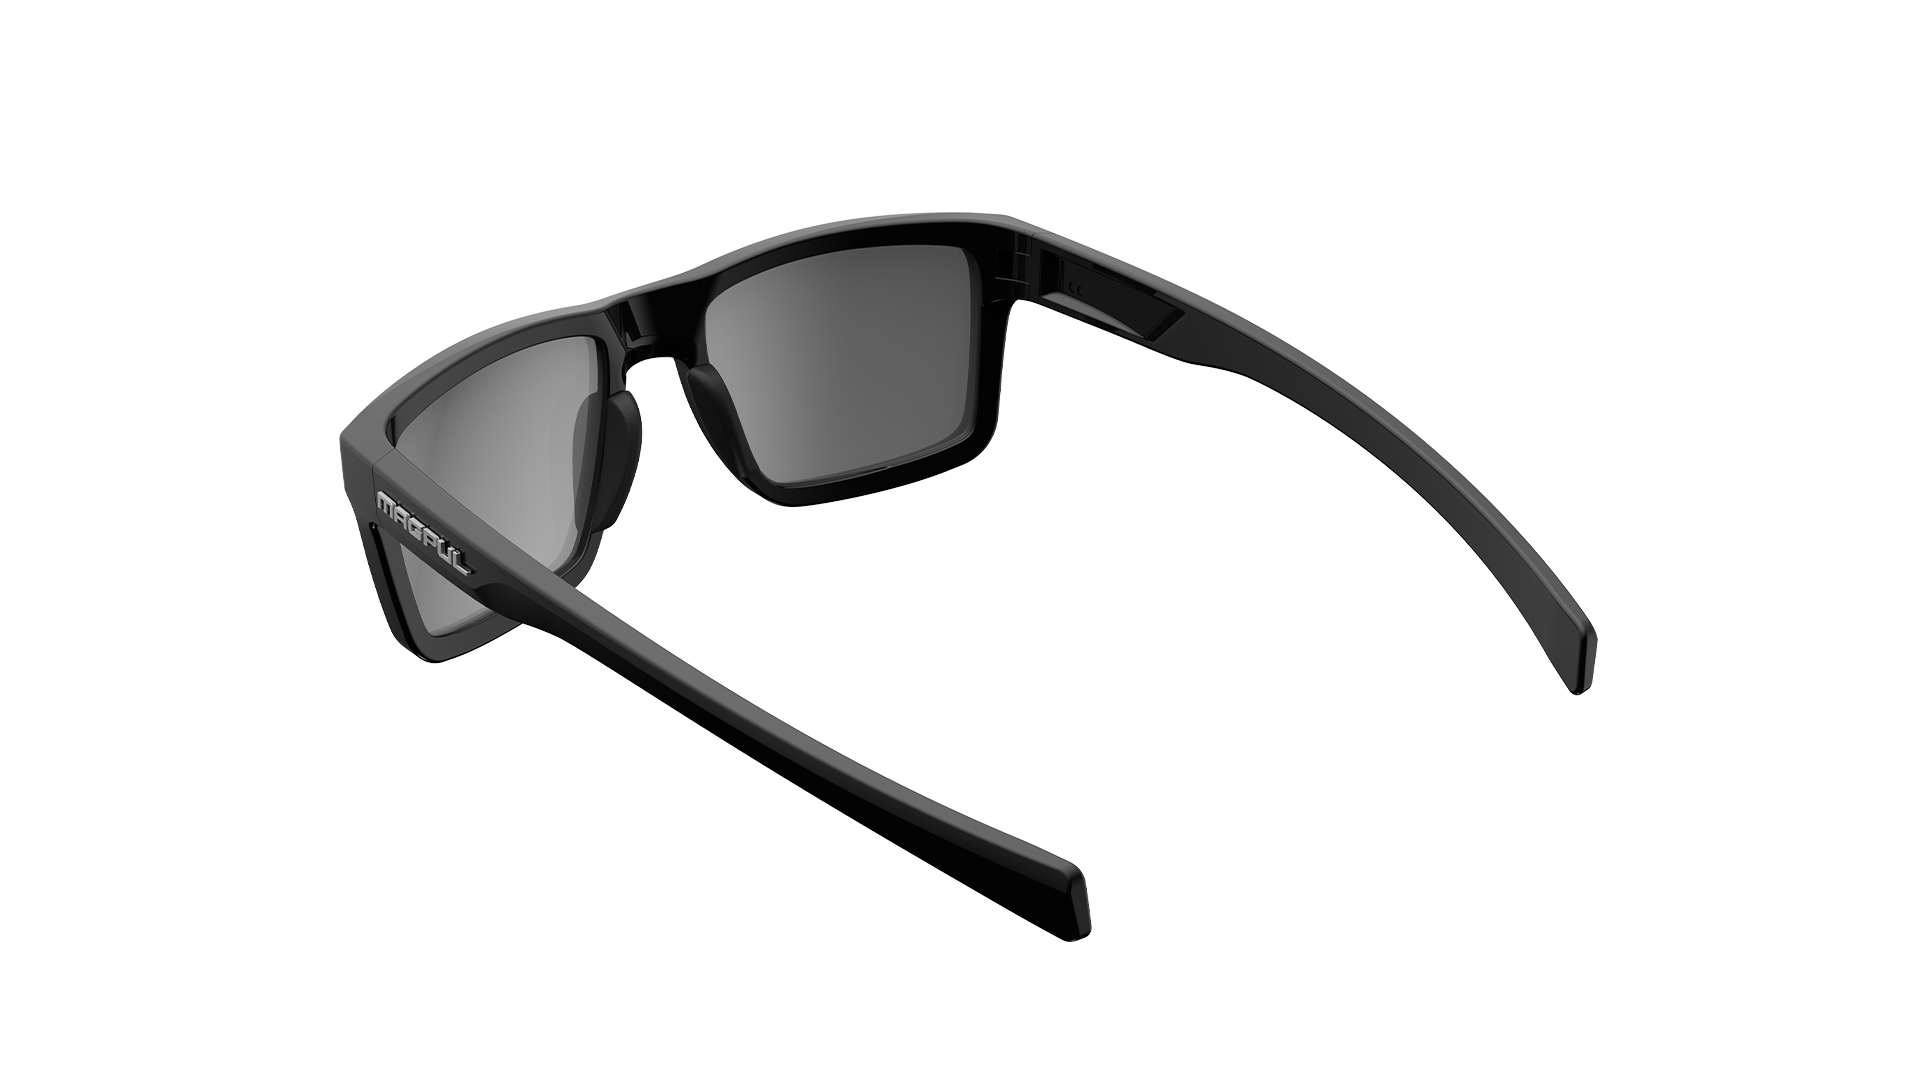 Magpul Rider sunglasses in black with silver mirror lens